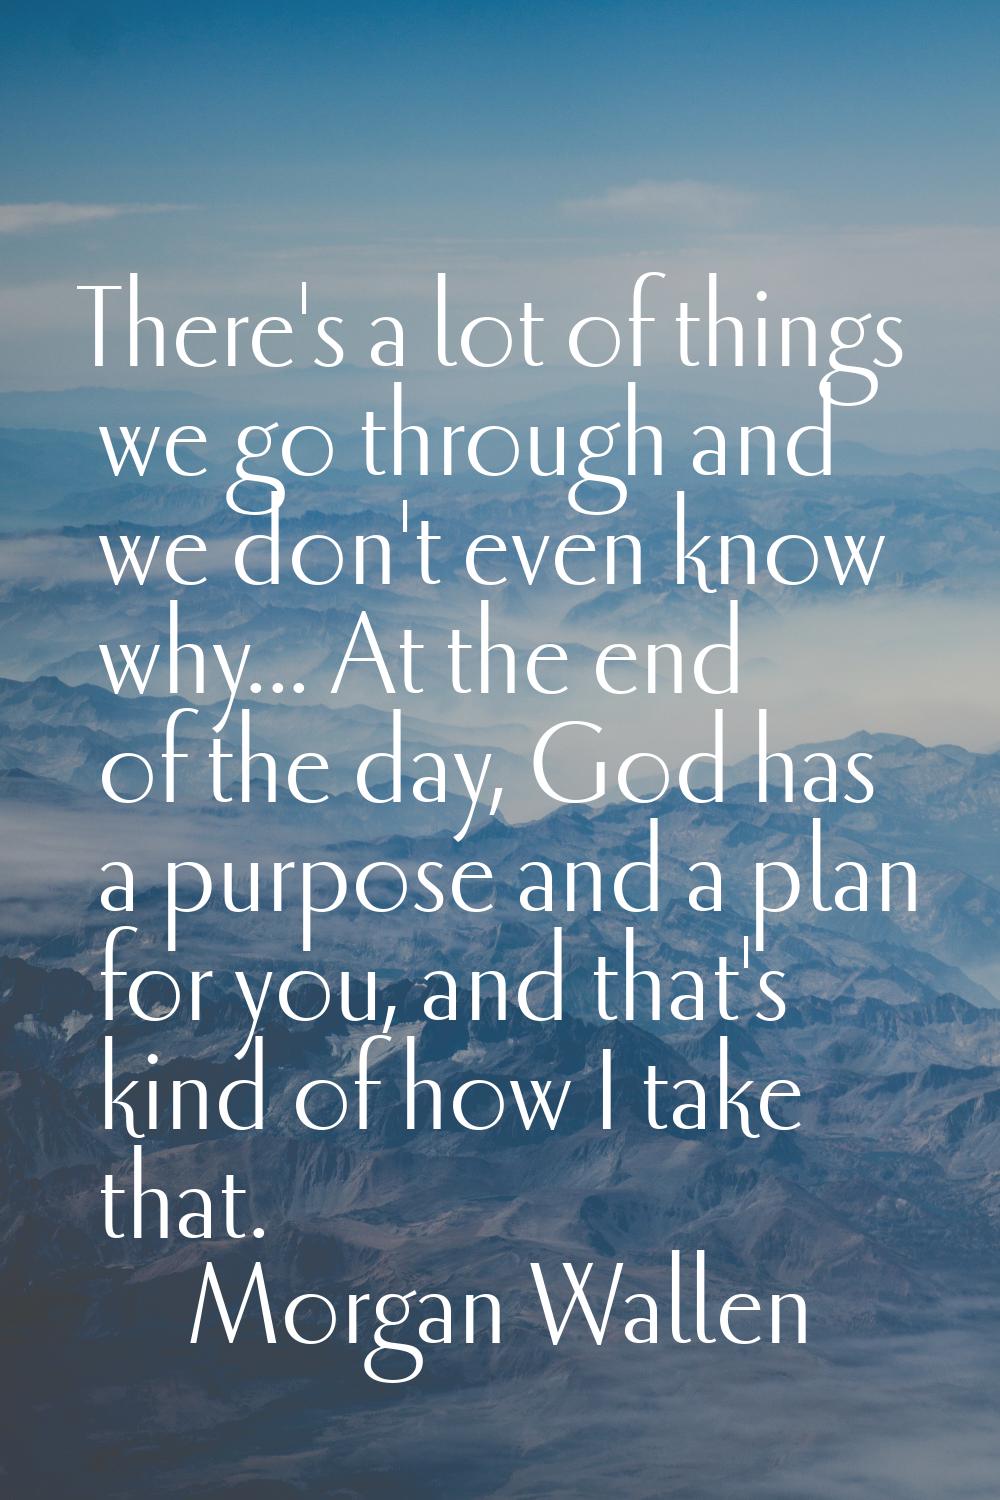 There's a lot of things we go through and we don't even know why... At the end of the day, God has 